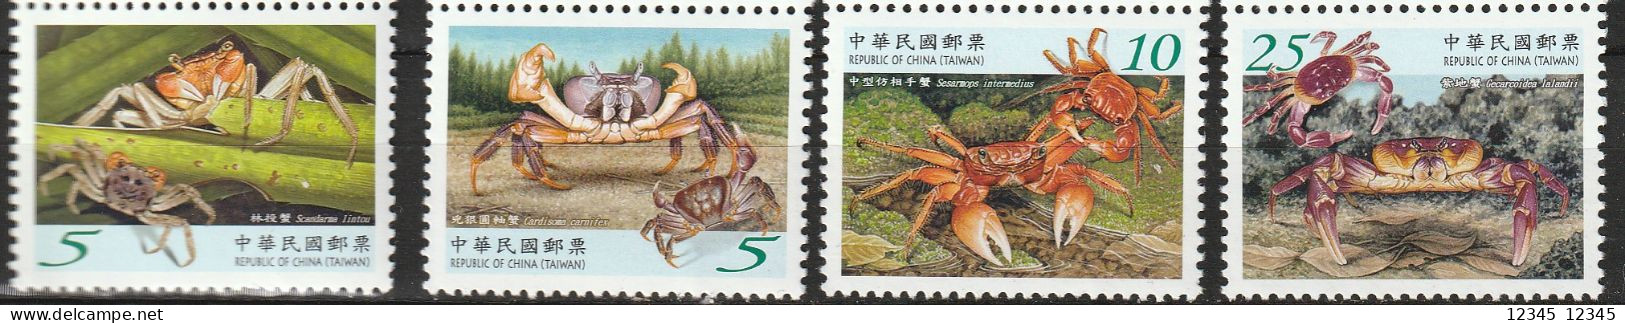 Taiwan 2010, Postfris MNH, Crustaceans - Unused Stamps